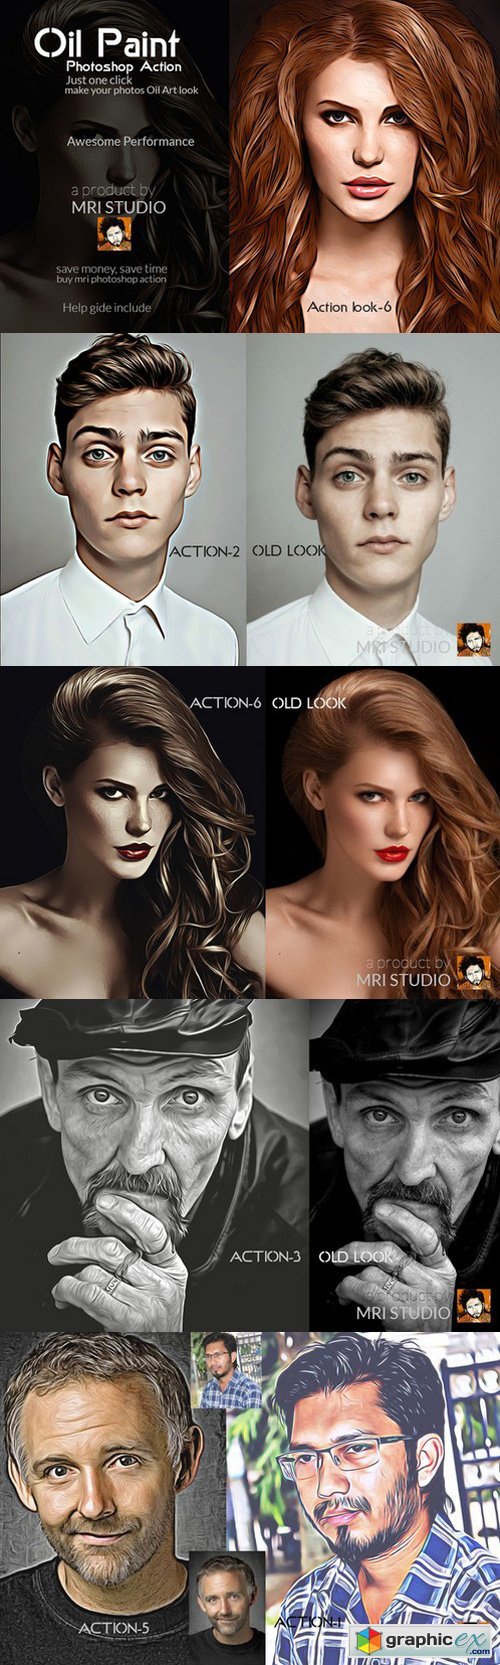 oil paint filter for photoshop cc download